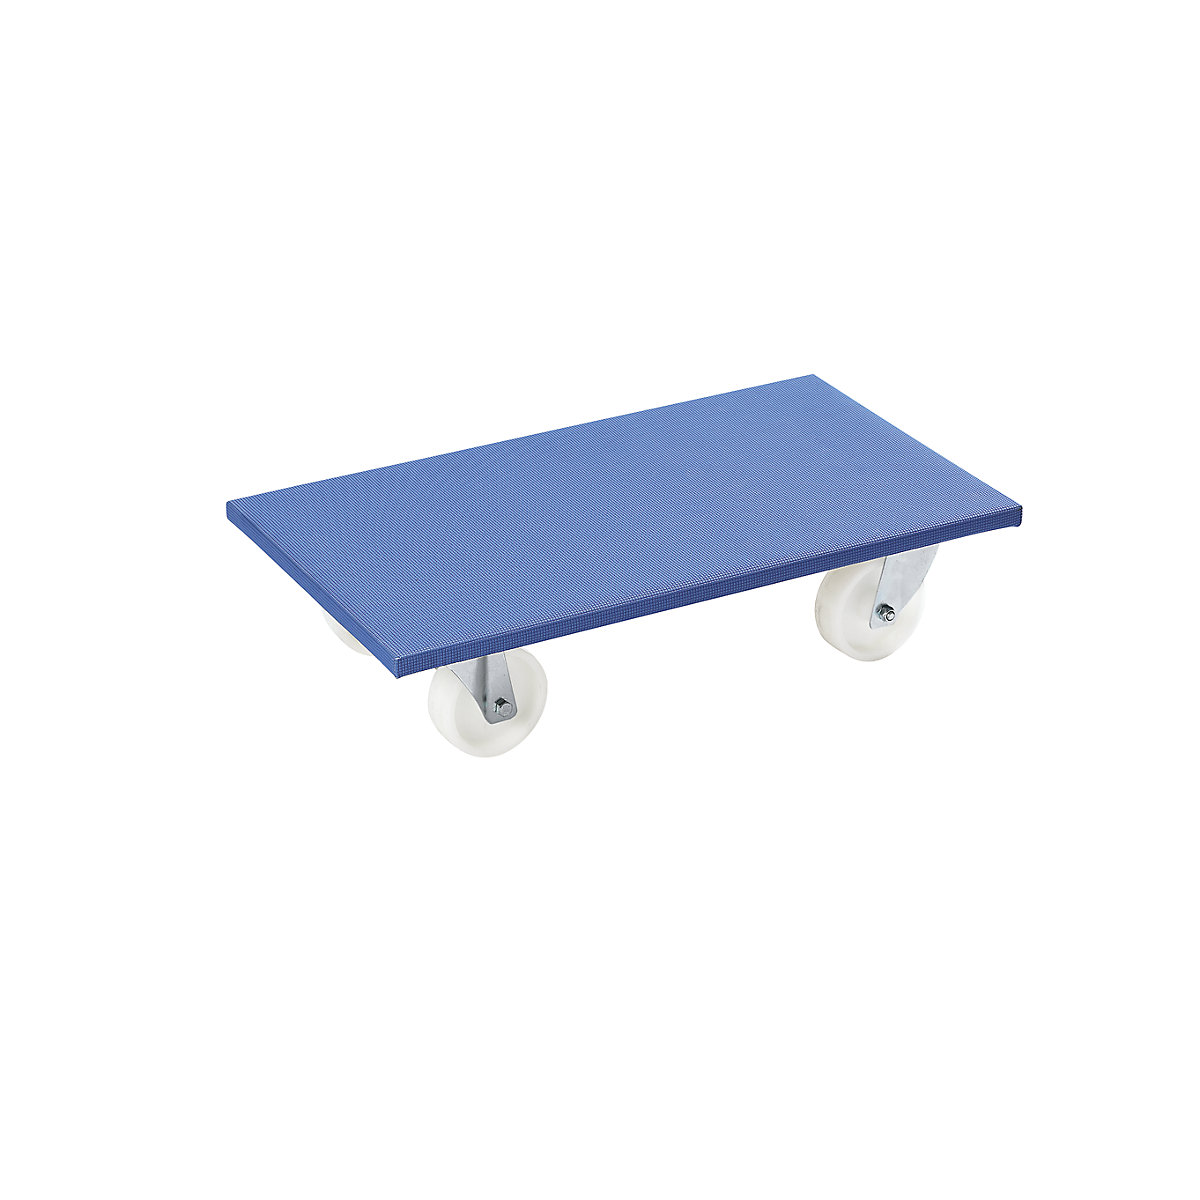 Furniture dolly, LxWxH 600 x 350 x 145 mm, pack of 2, max. load 500 kg, 2+ packs-6